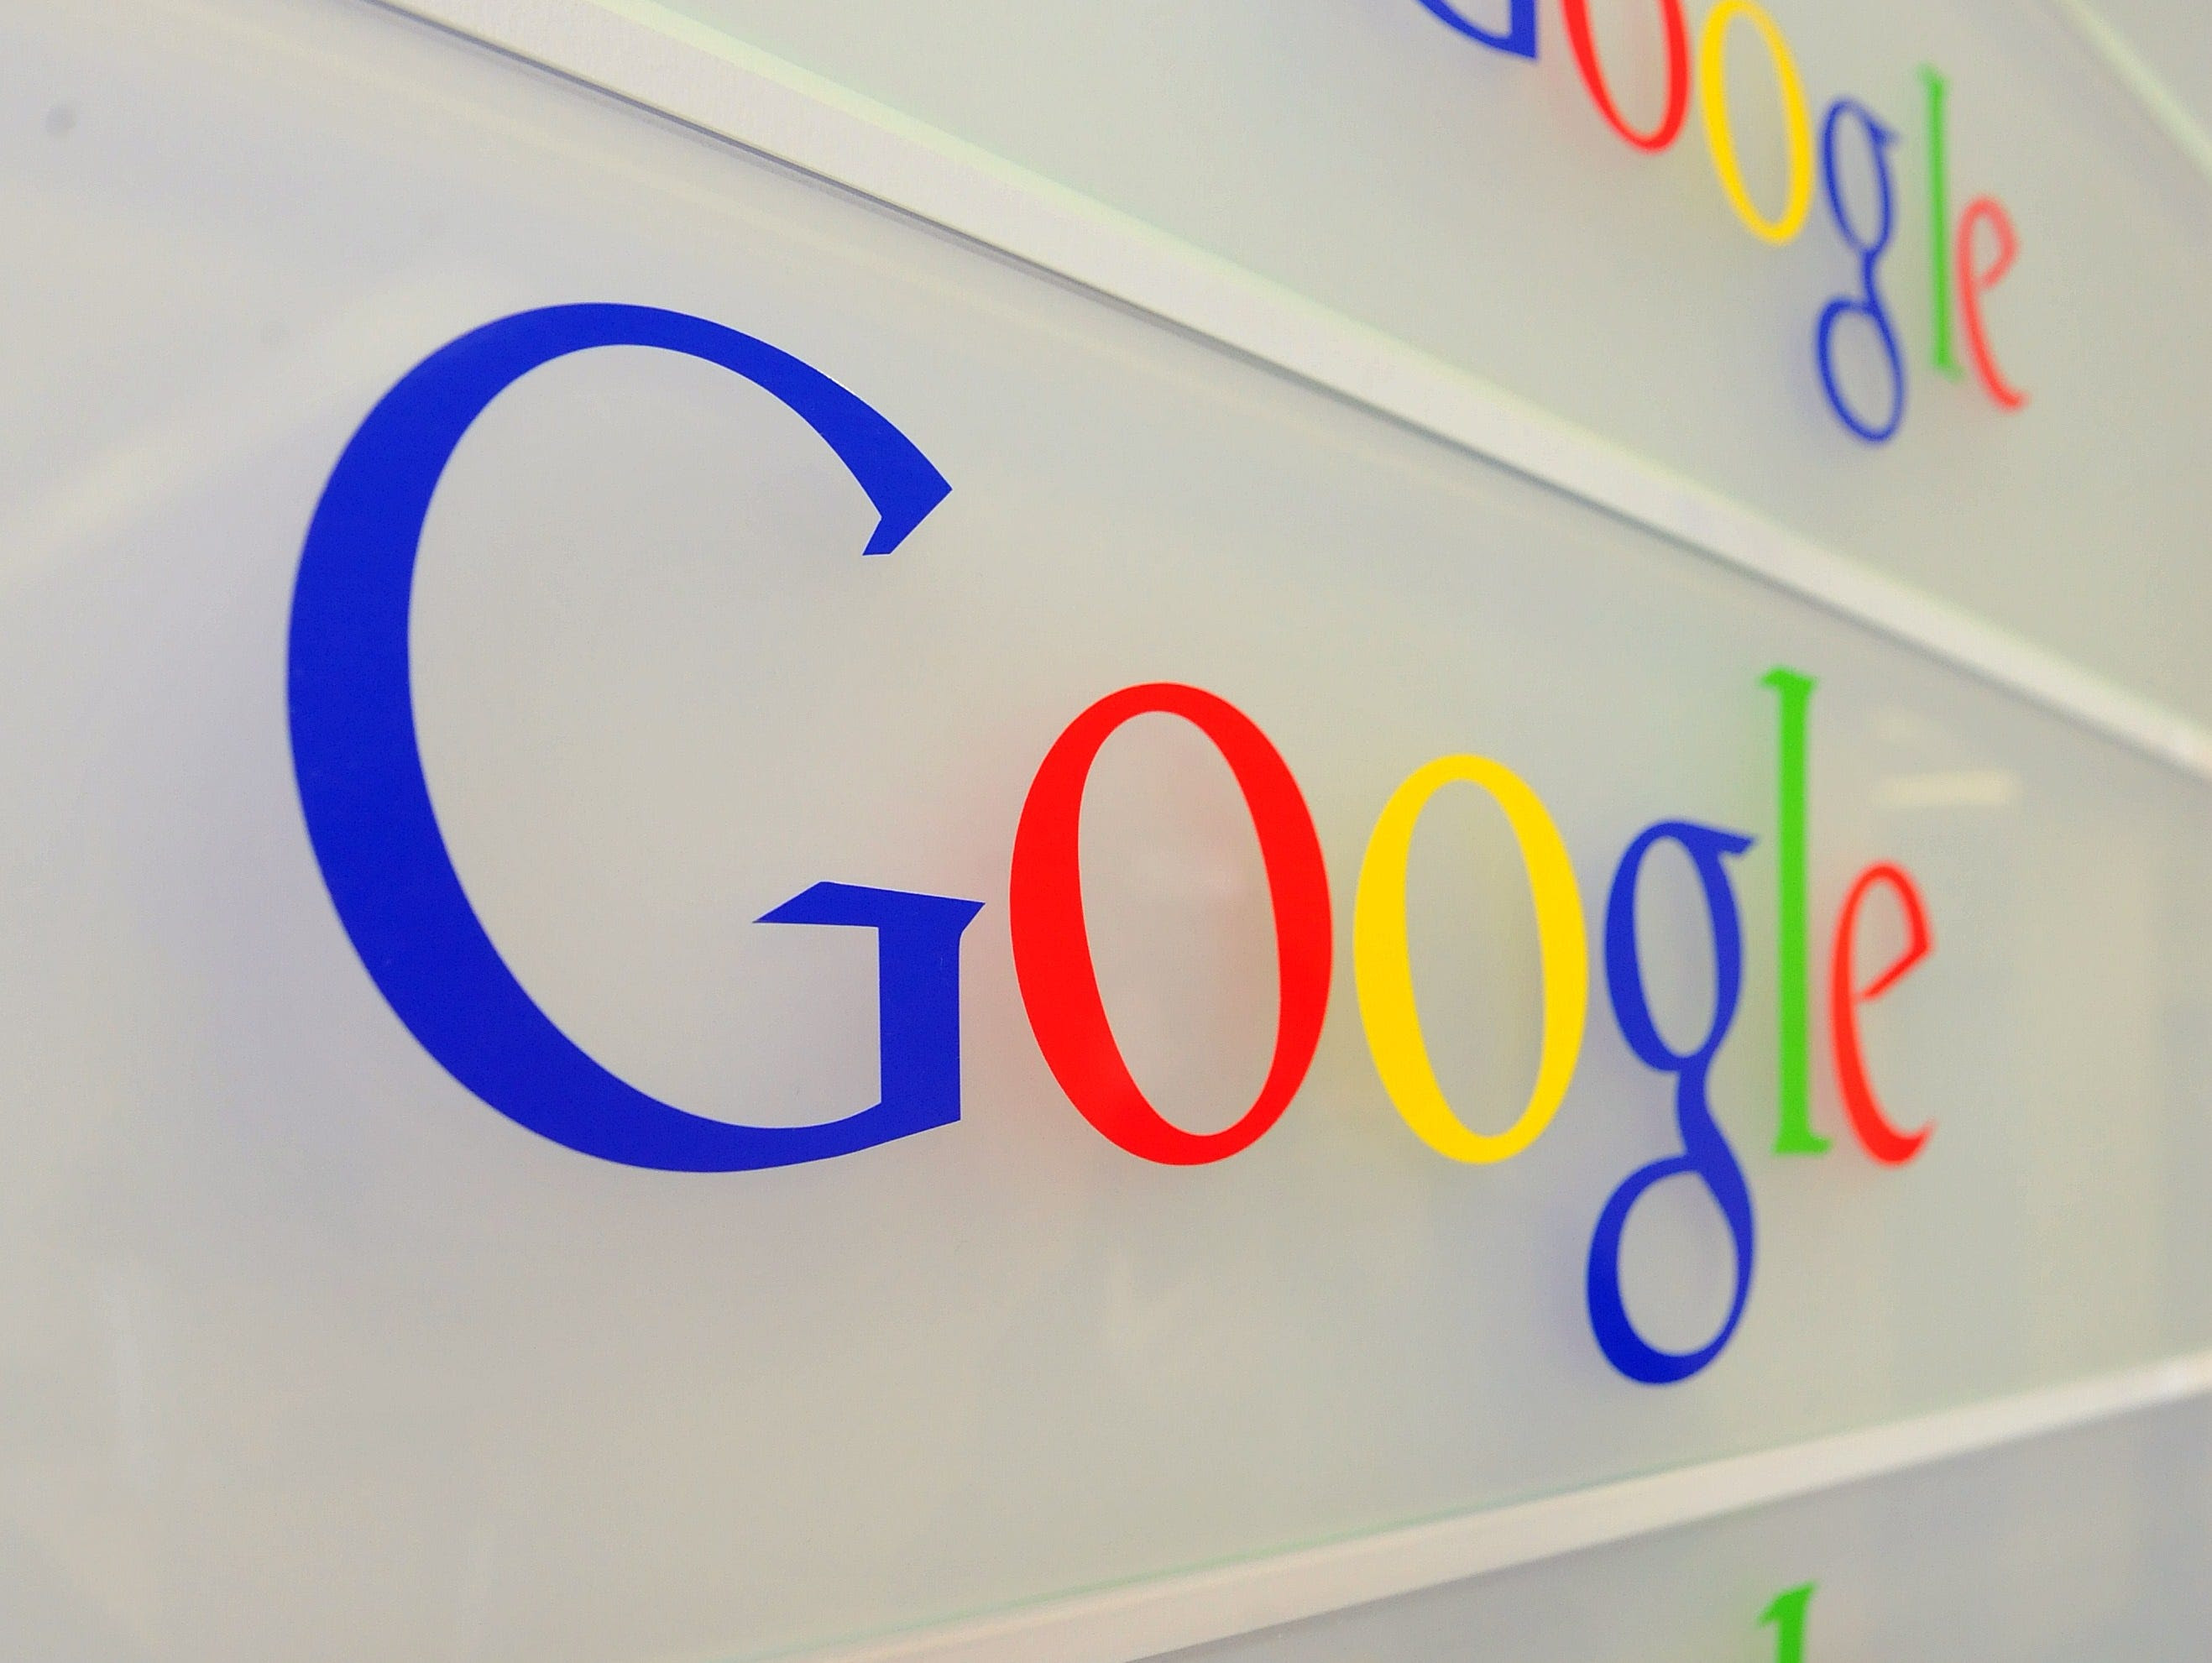 Google logo is seen on a wall at the entrance of the Google offices in Brussels on February 5, 2014.